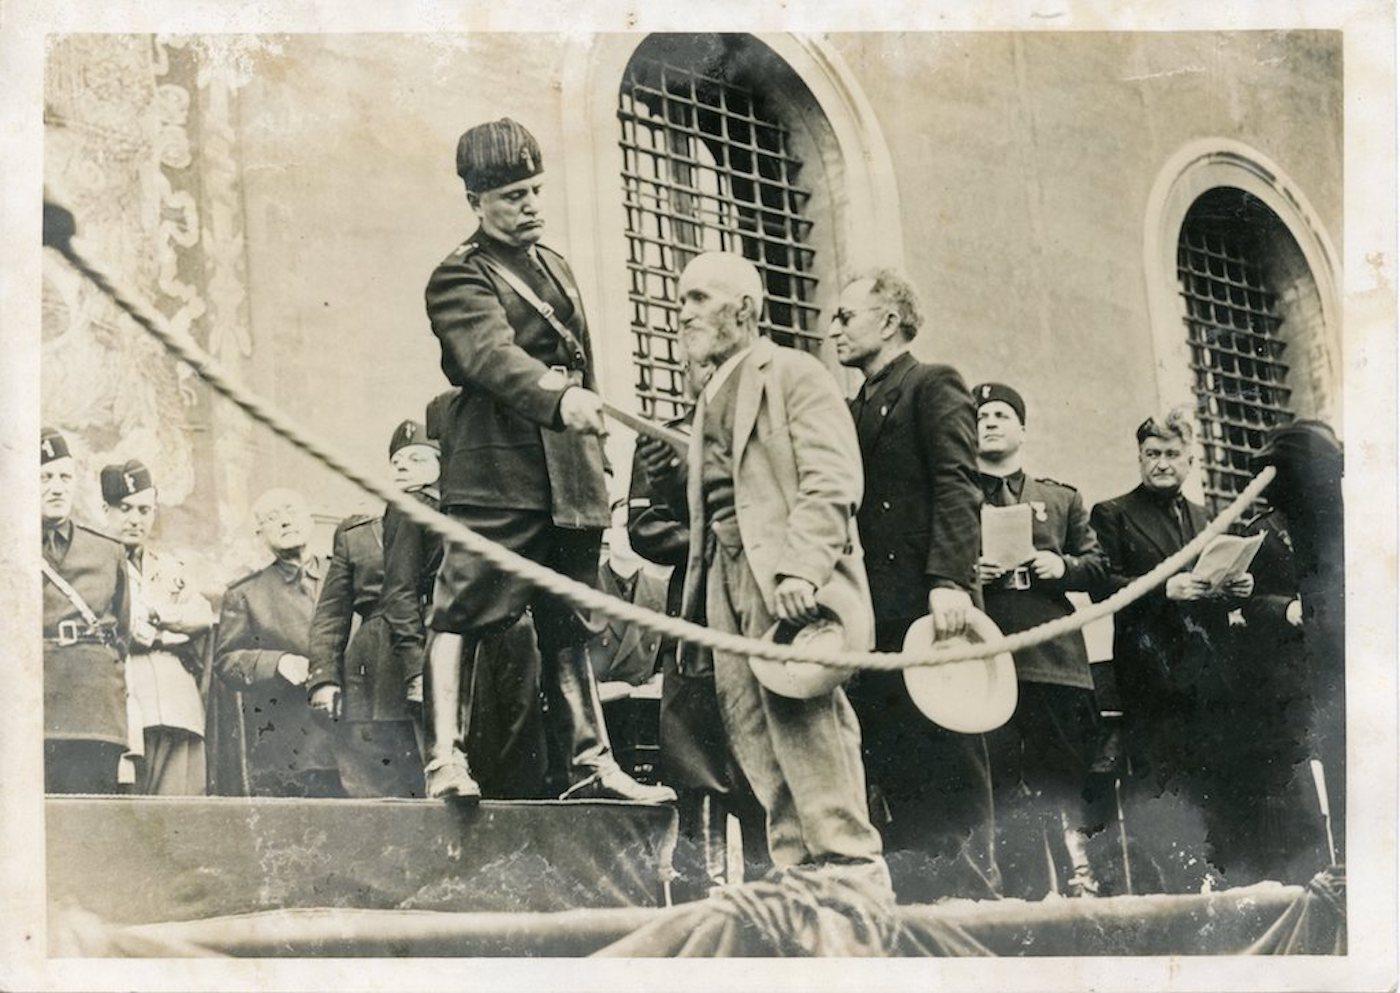 Unknown Black and White Photograph - Mussolini Distributes Honors - Vintage Photo - 1934